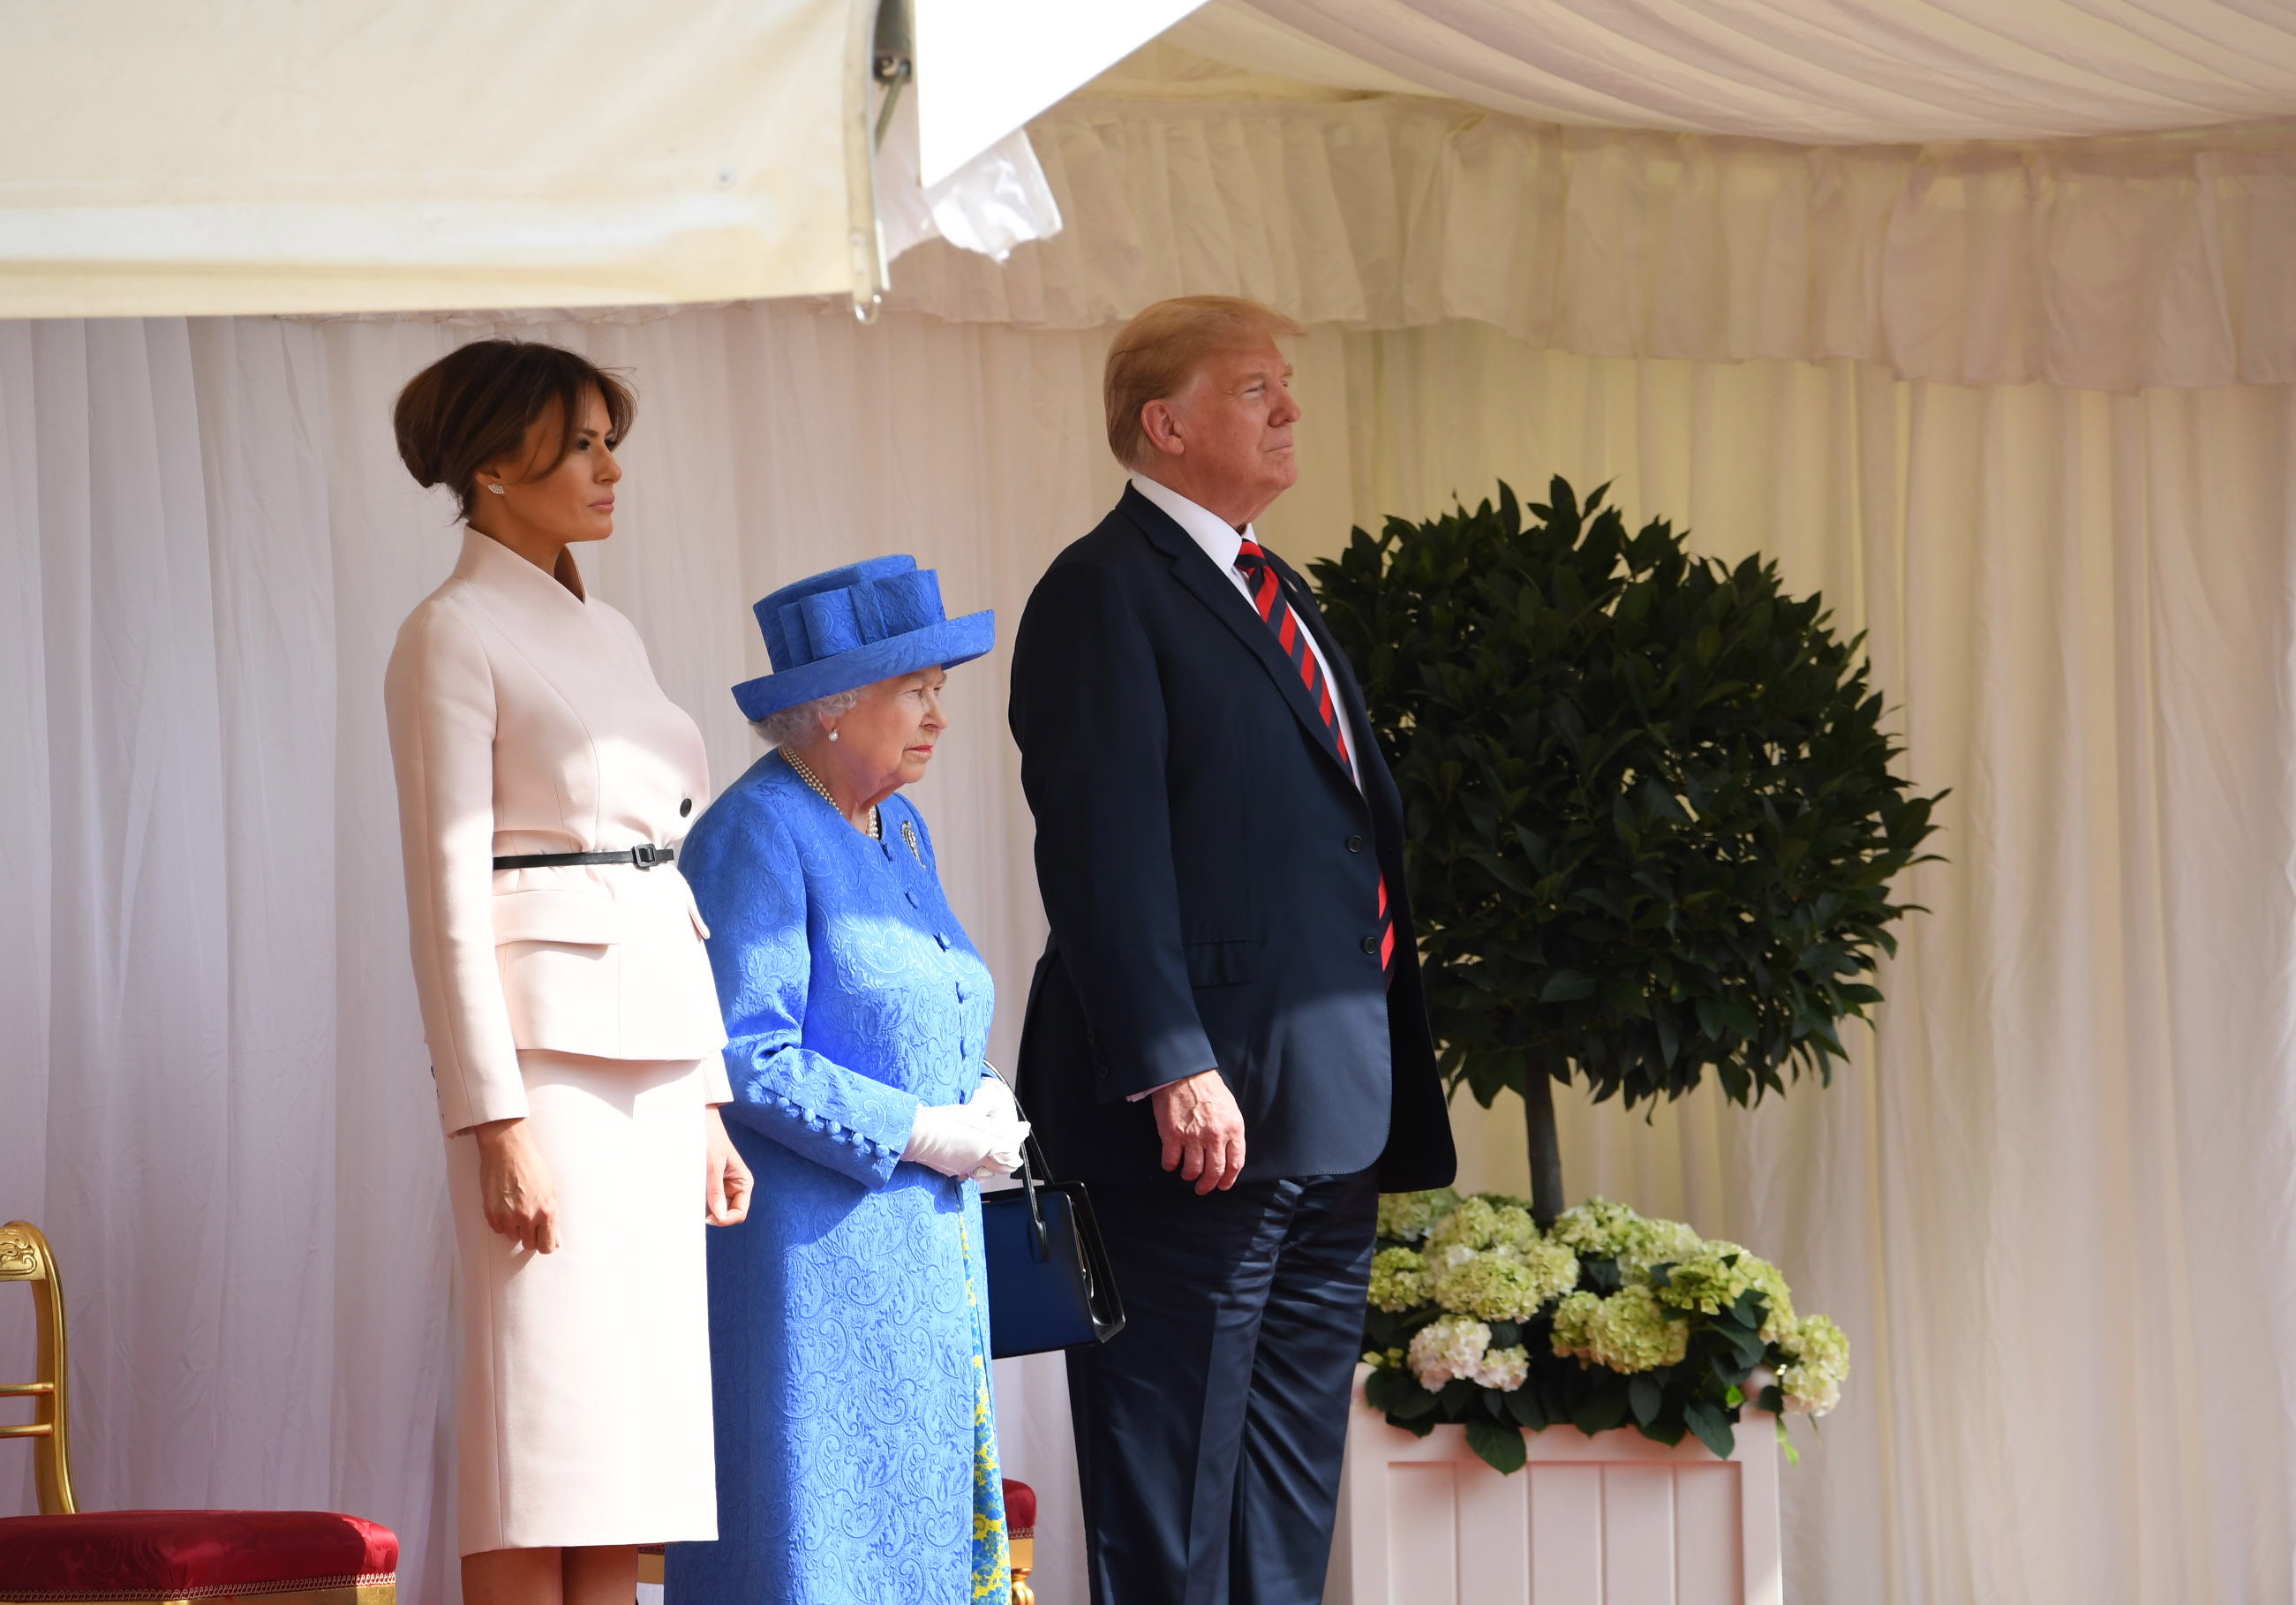 epa06886243 A handout photo made available by the British Ministry of Defence (MOD) shows Britain's Queen Elizabeth II (C) with US President Donald J. Trump (R) and his wife Melania Trump (L) during a welcome ceremony prior to their meeting at Windsor Castle in Windsor, Britain, 13 July 2018. US President Trump is on a three-day working visit to the United Kingdom, his first trip to the country as US president.  EPA/SGT PAUL RANDALL RLC / BRITISH MINISTRY OF DEFENCE / HANDOUT MANDATORY CREDIT MOD SGT PAUL RANDALL RLC: CROWN COPYRIGHT HANDOUT EDITORIAL USE ONLY/NO SALES